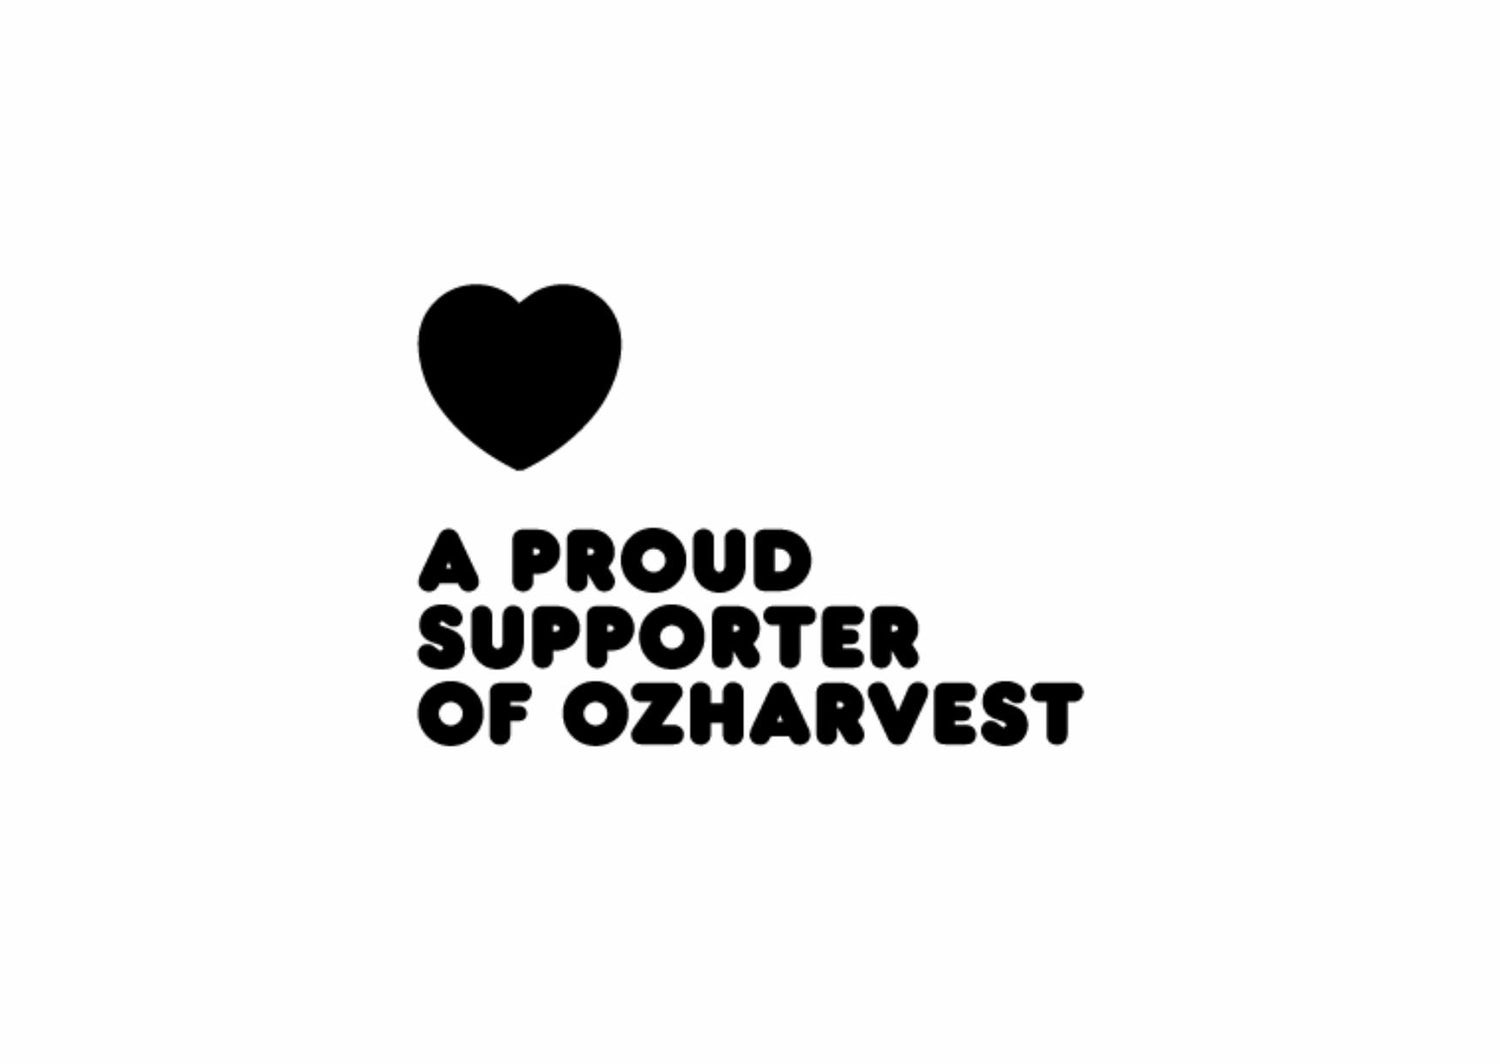 rePlated donates 2% of it's revenue to OzHarvest